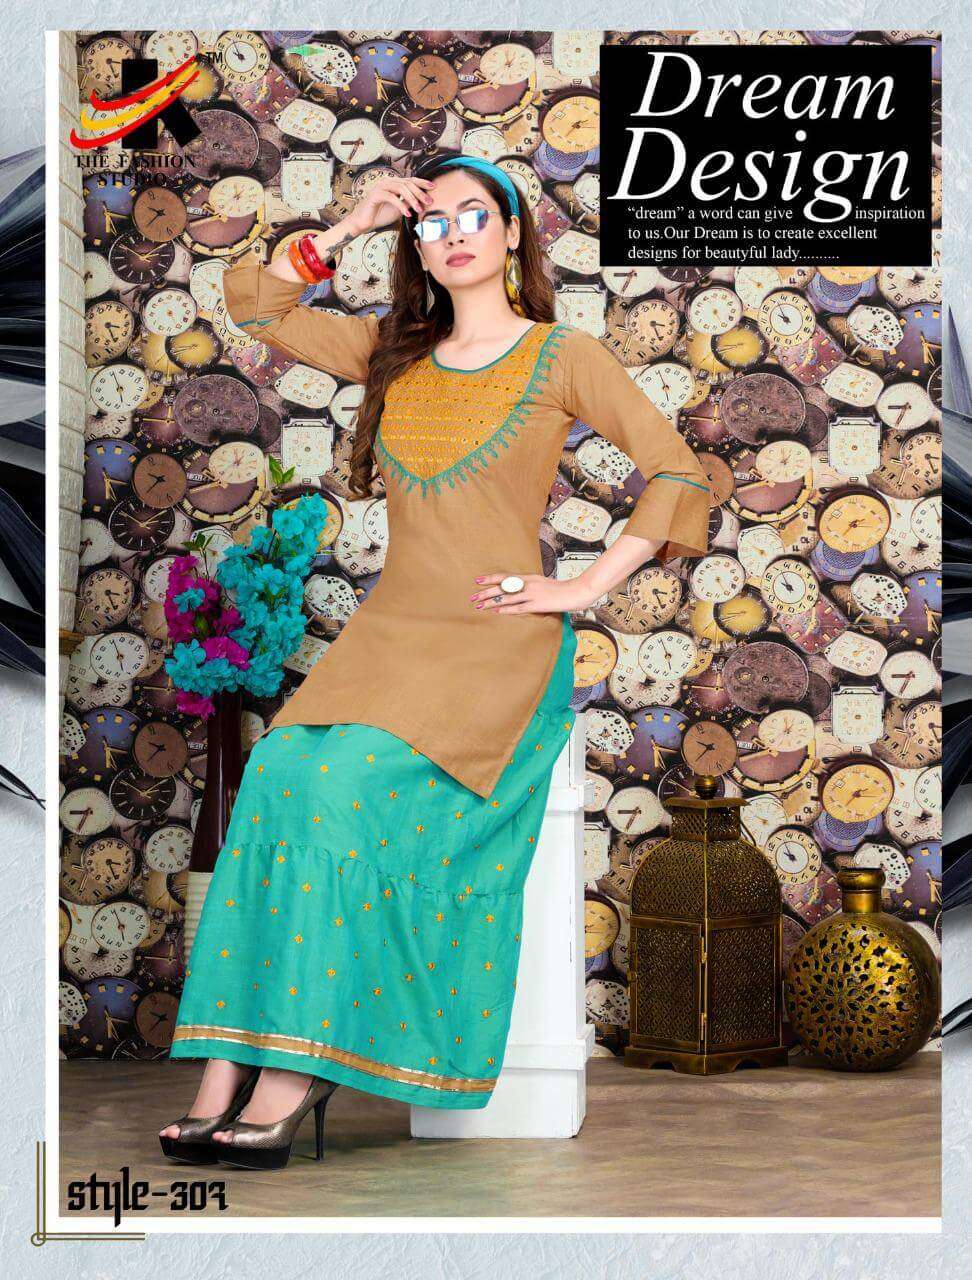 CLASSIC BY THE FASHION STUDIO 301 TO 308 SERIES DESIGNER STYLISH FANCY COLORFUL BEAUTIFUL PARTY WEAR & ETHNIC WEAR COLLECTION RAYON TWO TONE KURTIS WITH BOTTOM AT WHOLESALE PRICE